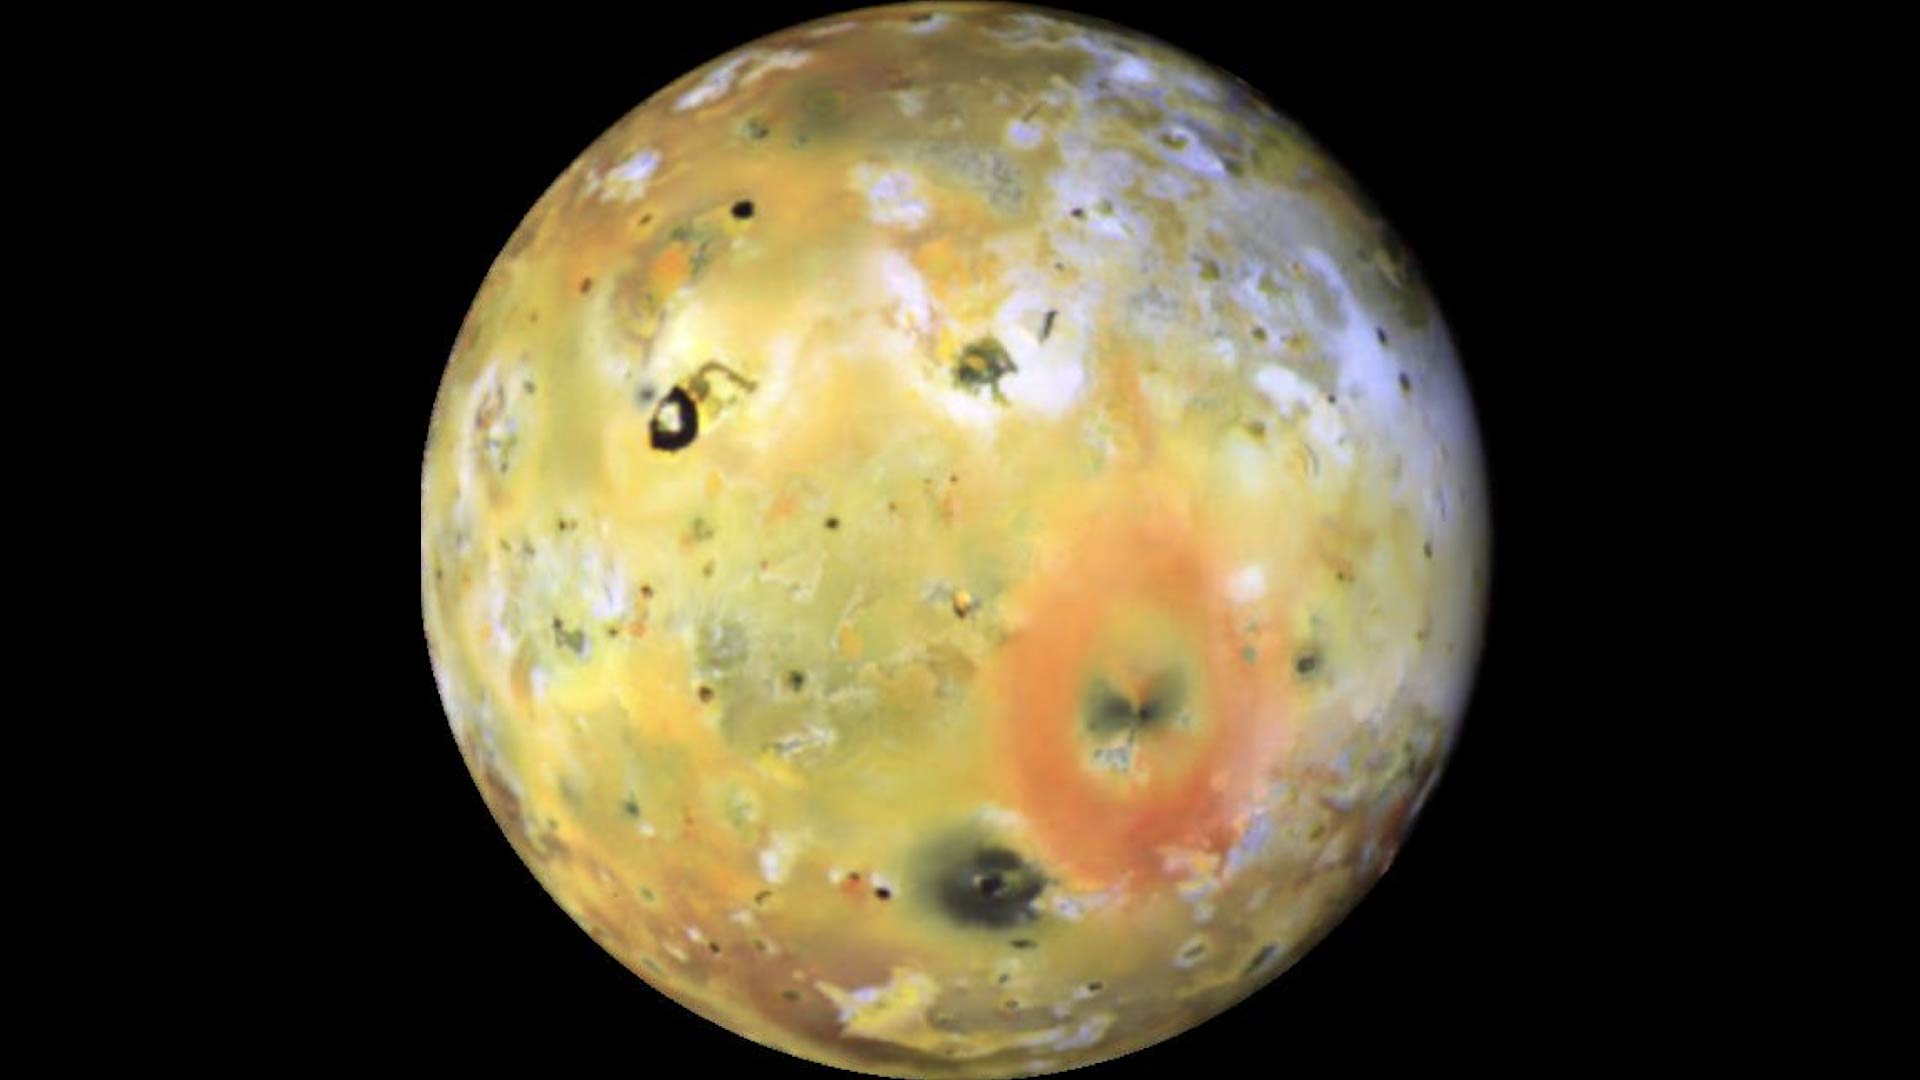 An image of Io. It is yellow, with splotches of orange and blue.